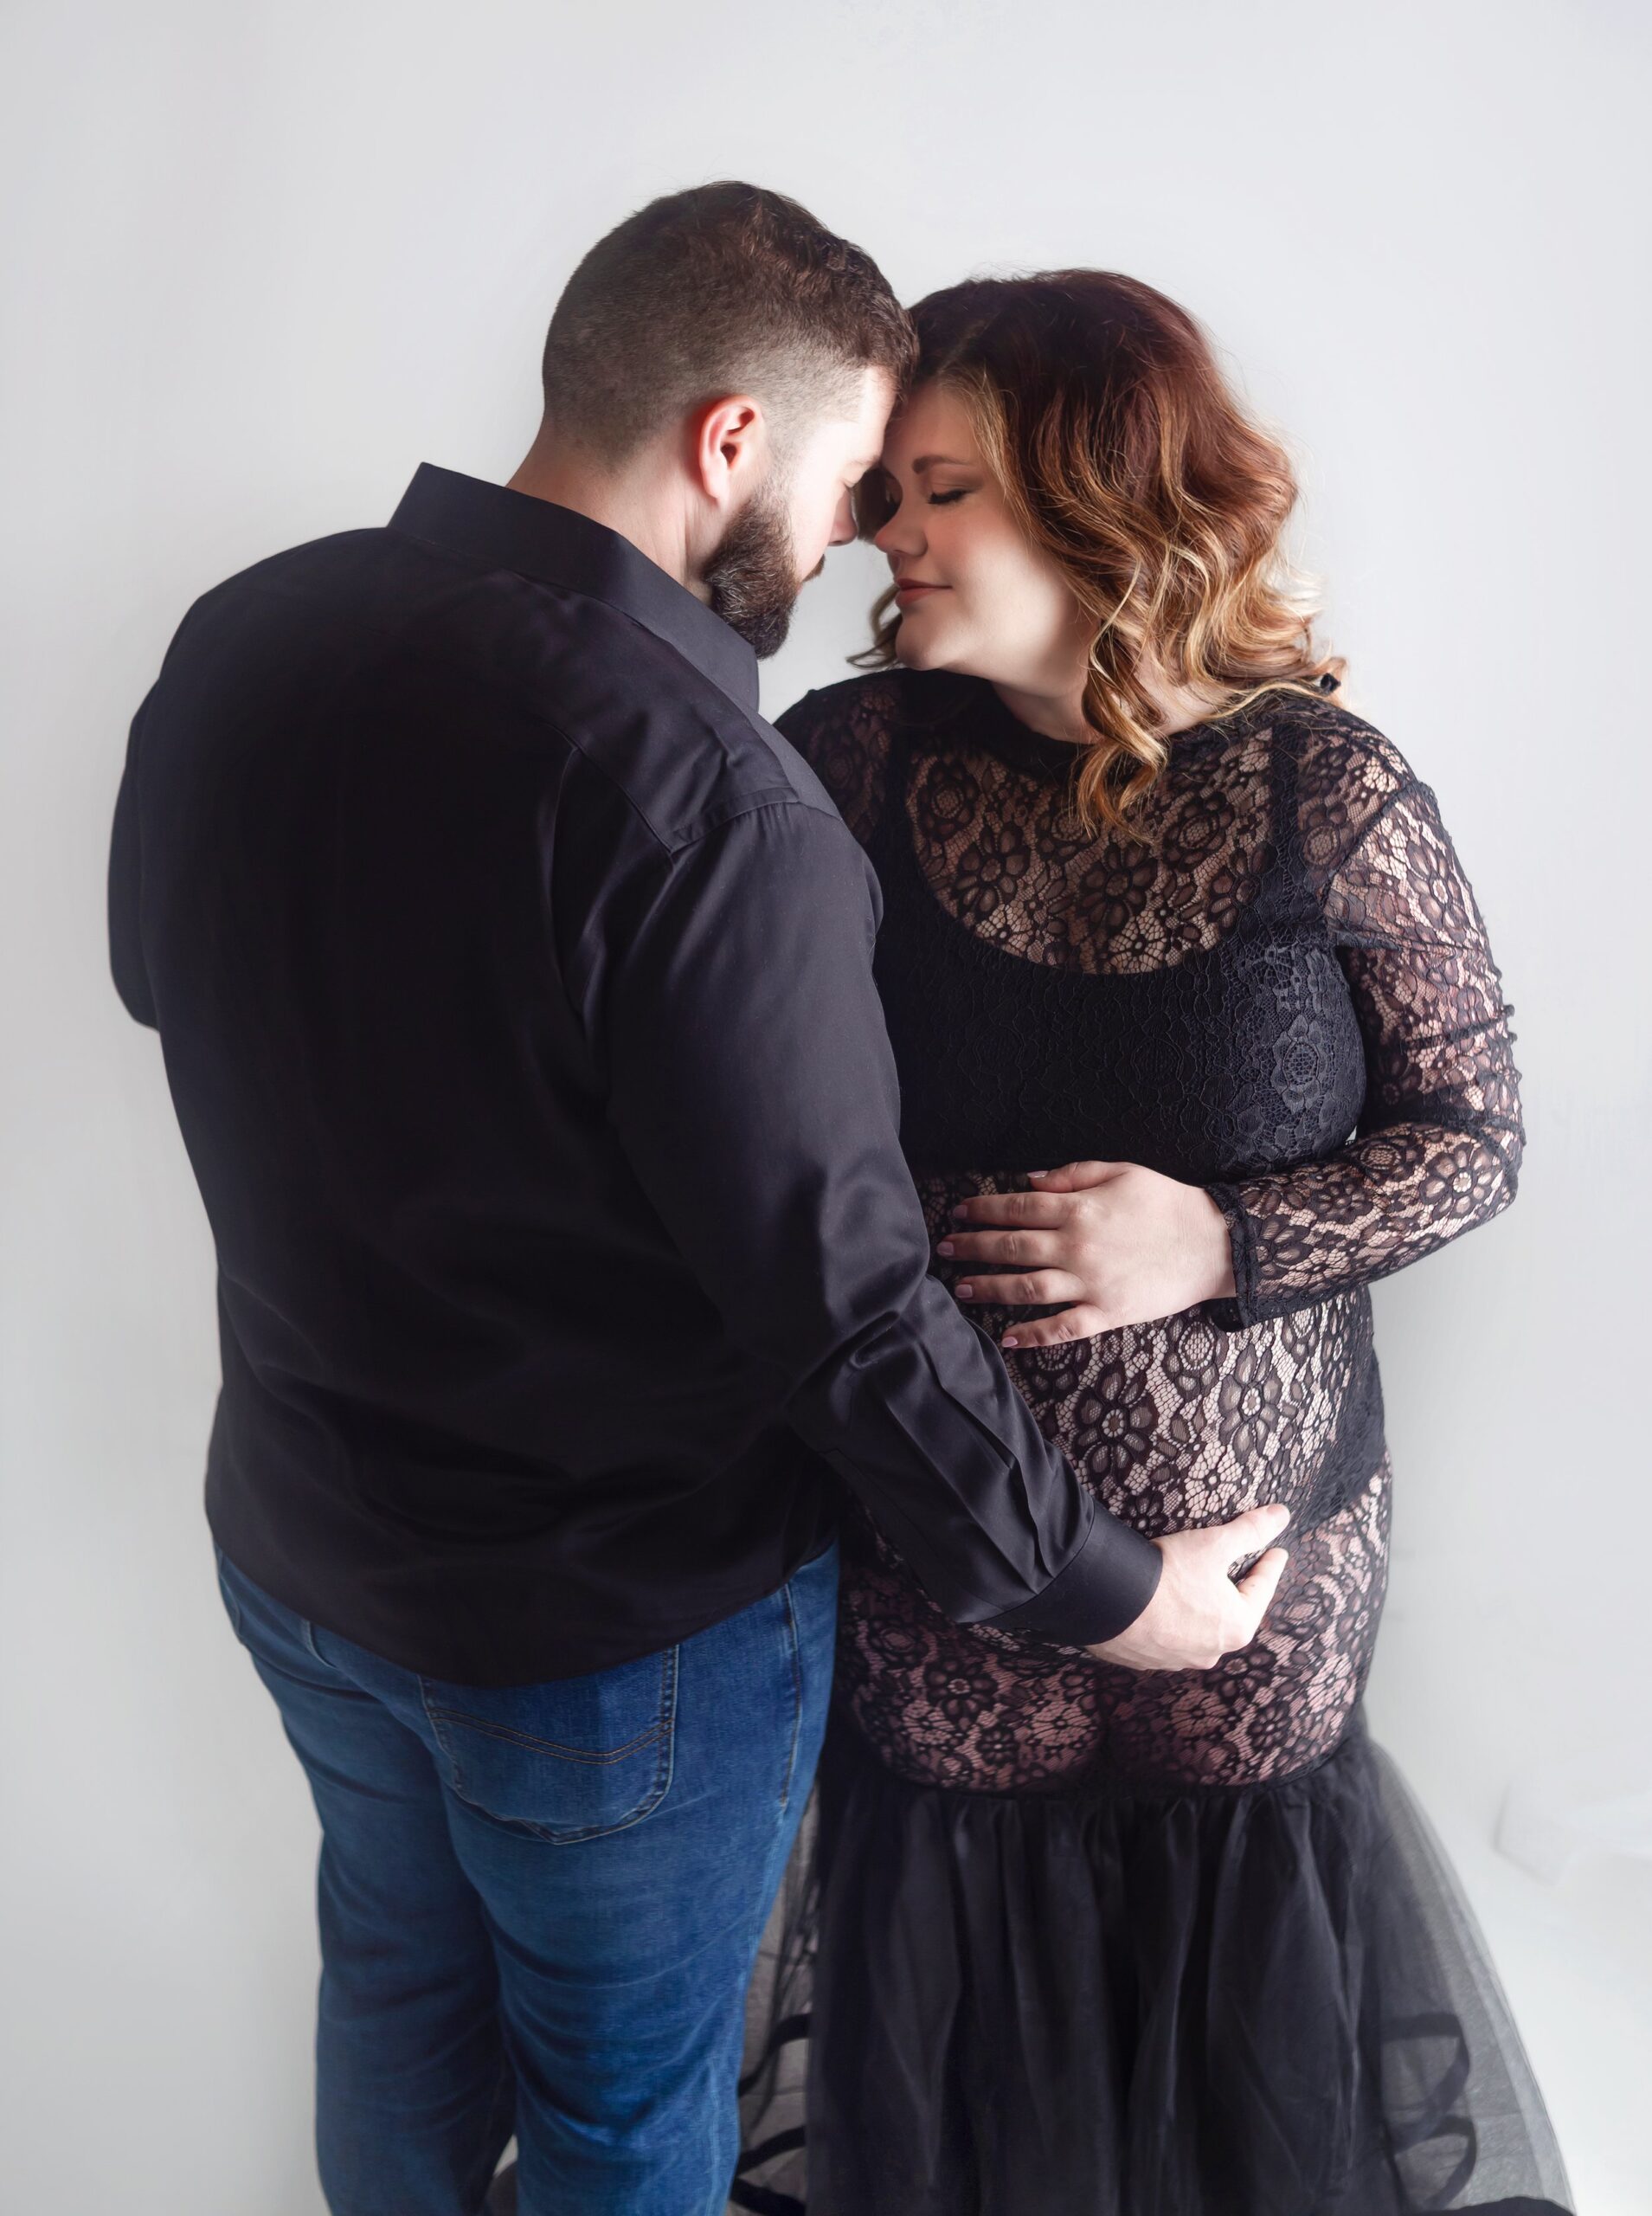 man and women hugging, women wearing black gown during maternity photoshoot in brentwood tennessee photography studio